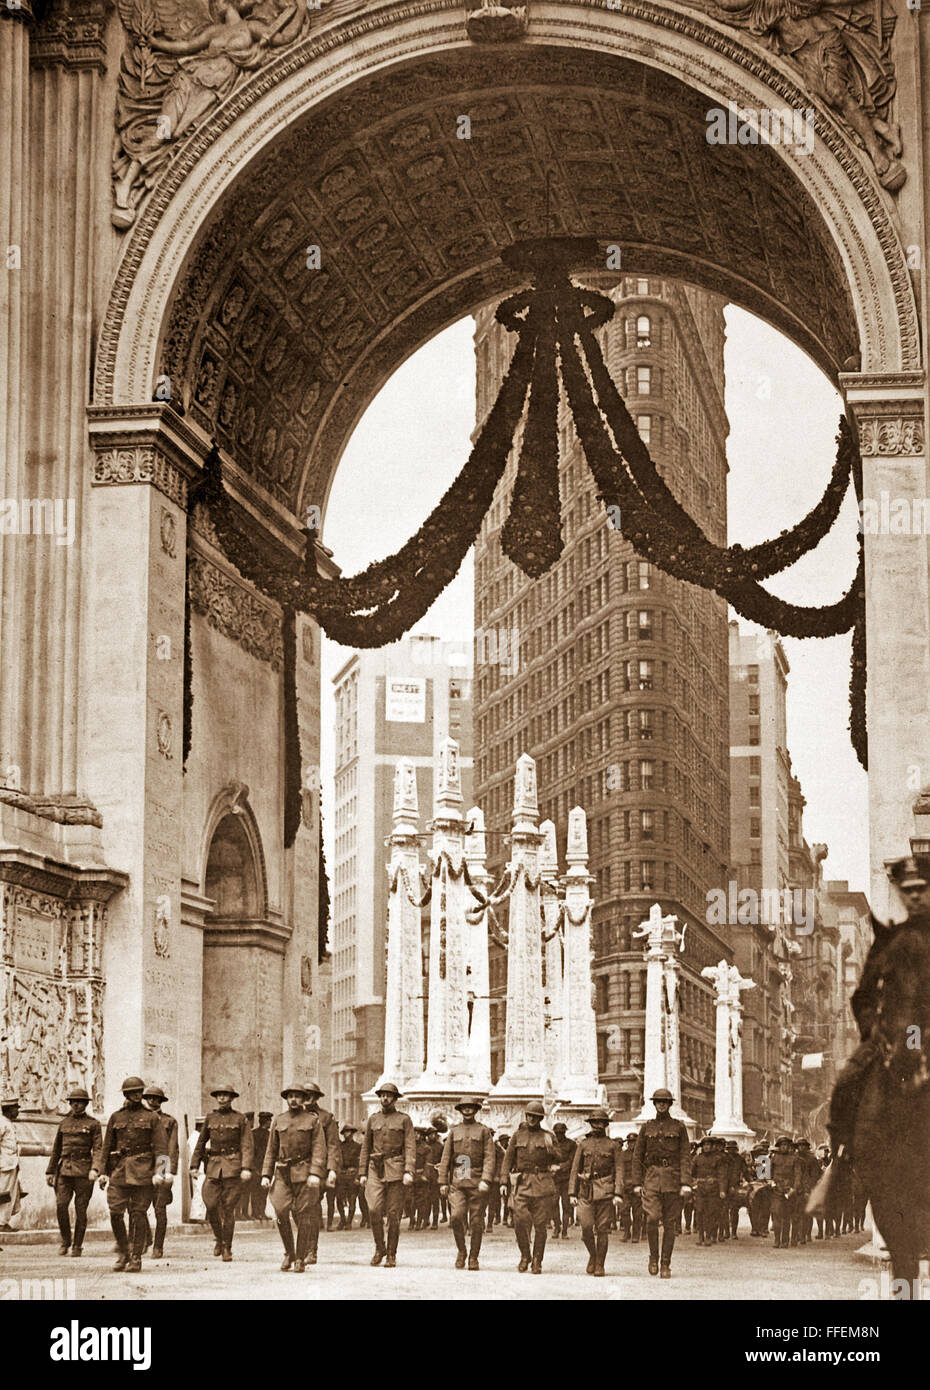 Col. Donovan and staff of 165th Infantry, passing under the Victory Arch, N.Y.C. 1919. Photograph by Paul Thompson Stock Photo